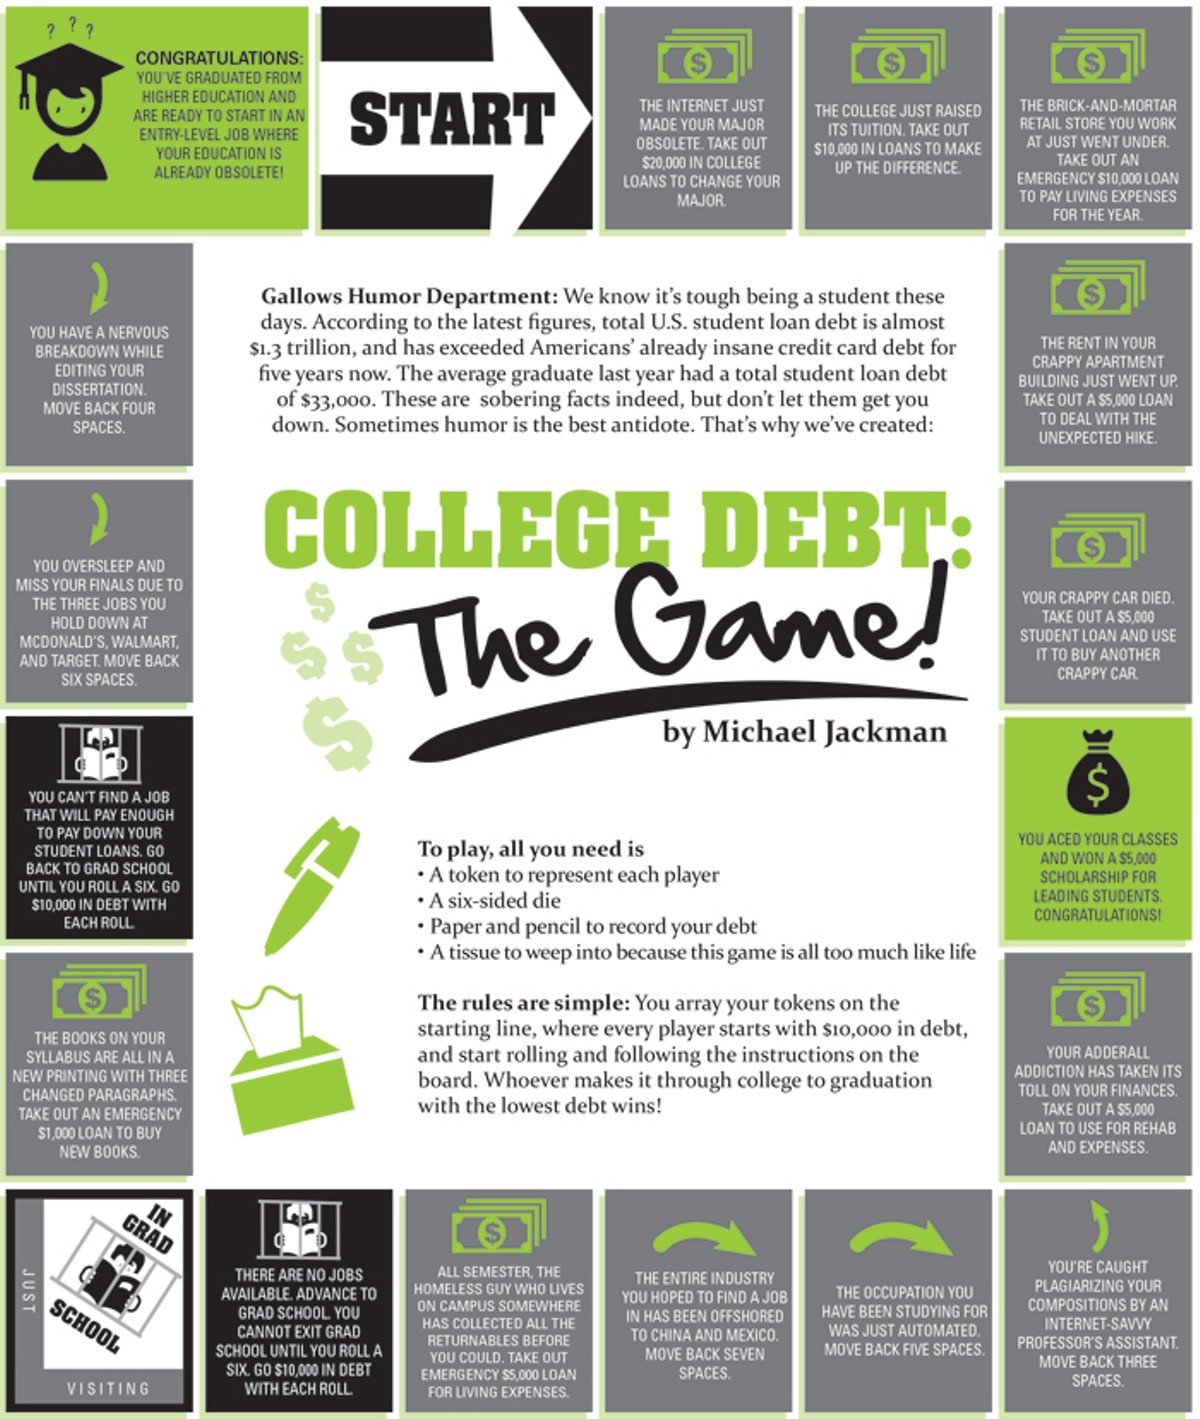 The college debt game